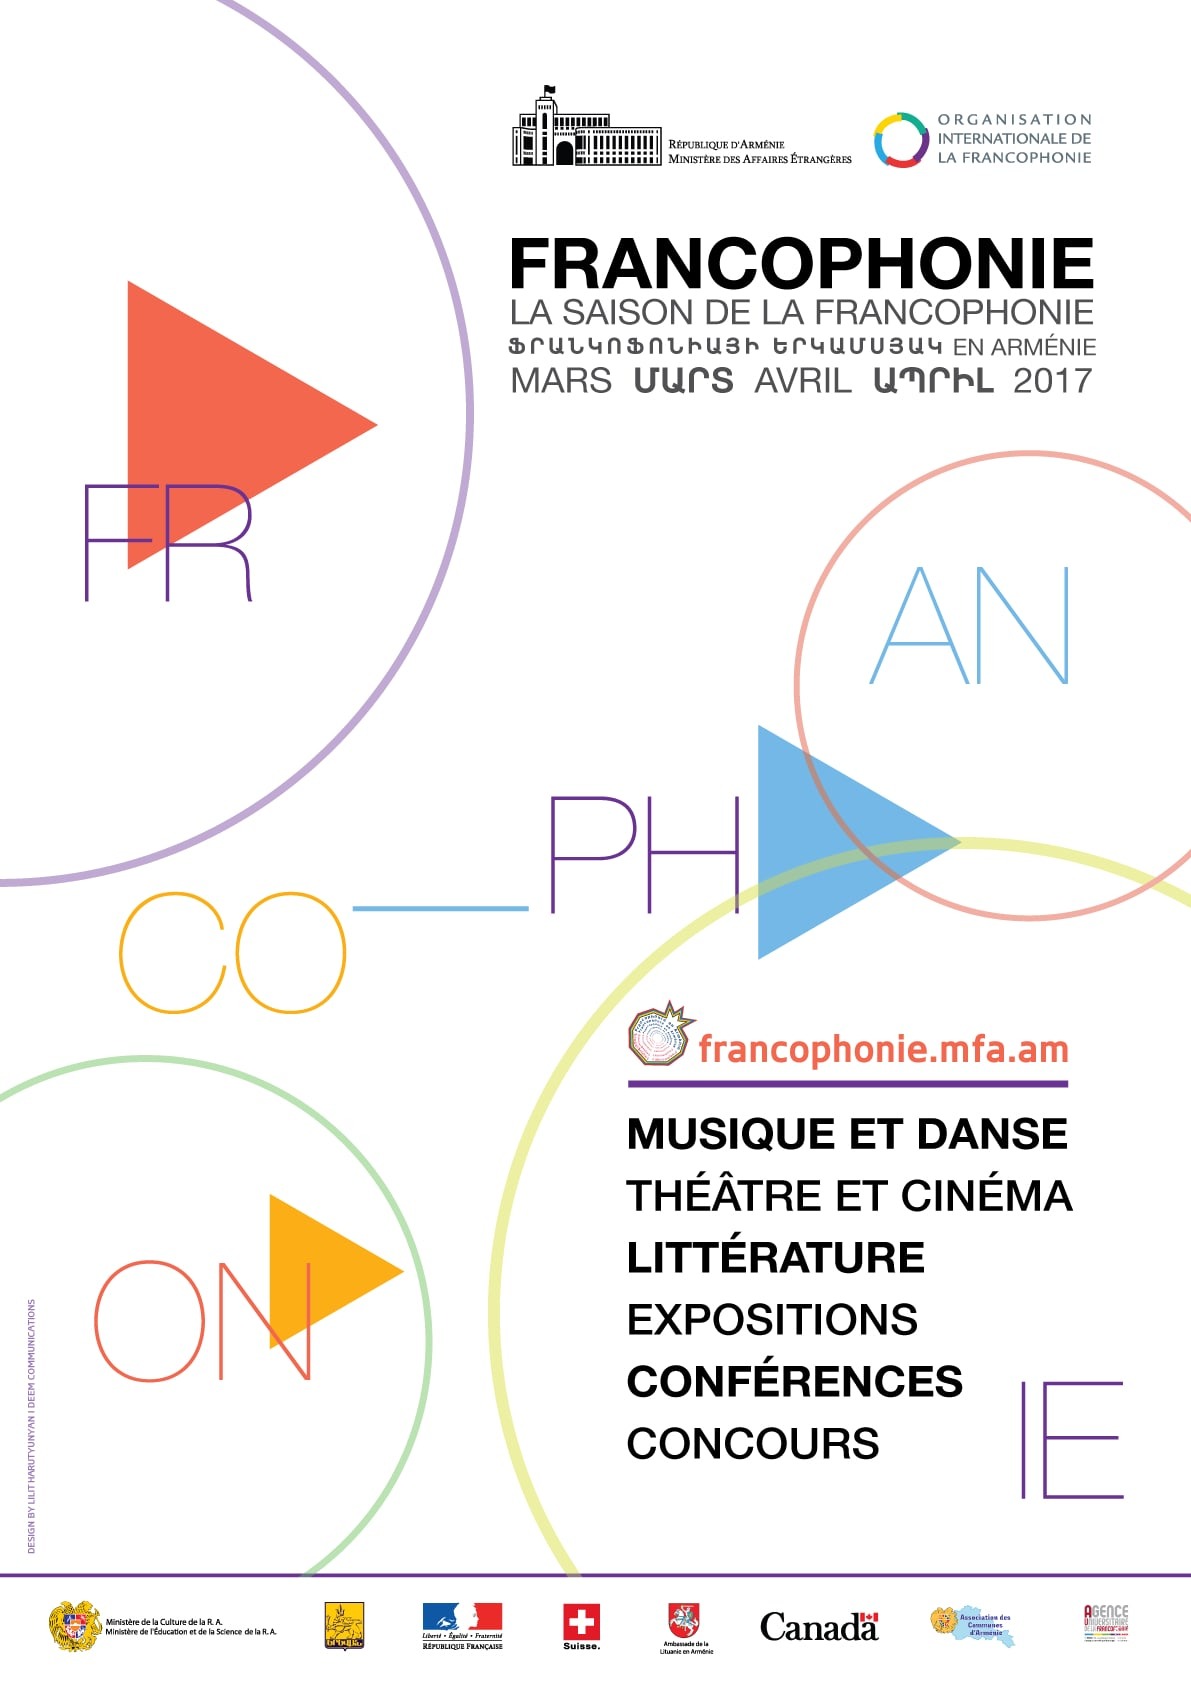 Two-month long Francophonie season 2017 launched  in Armenia